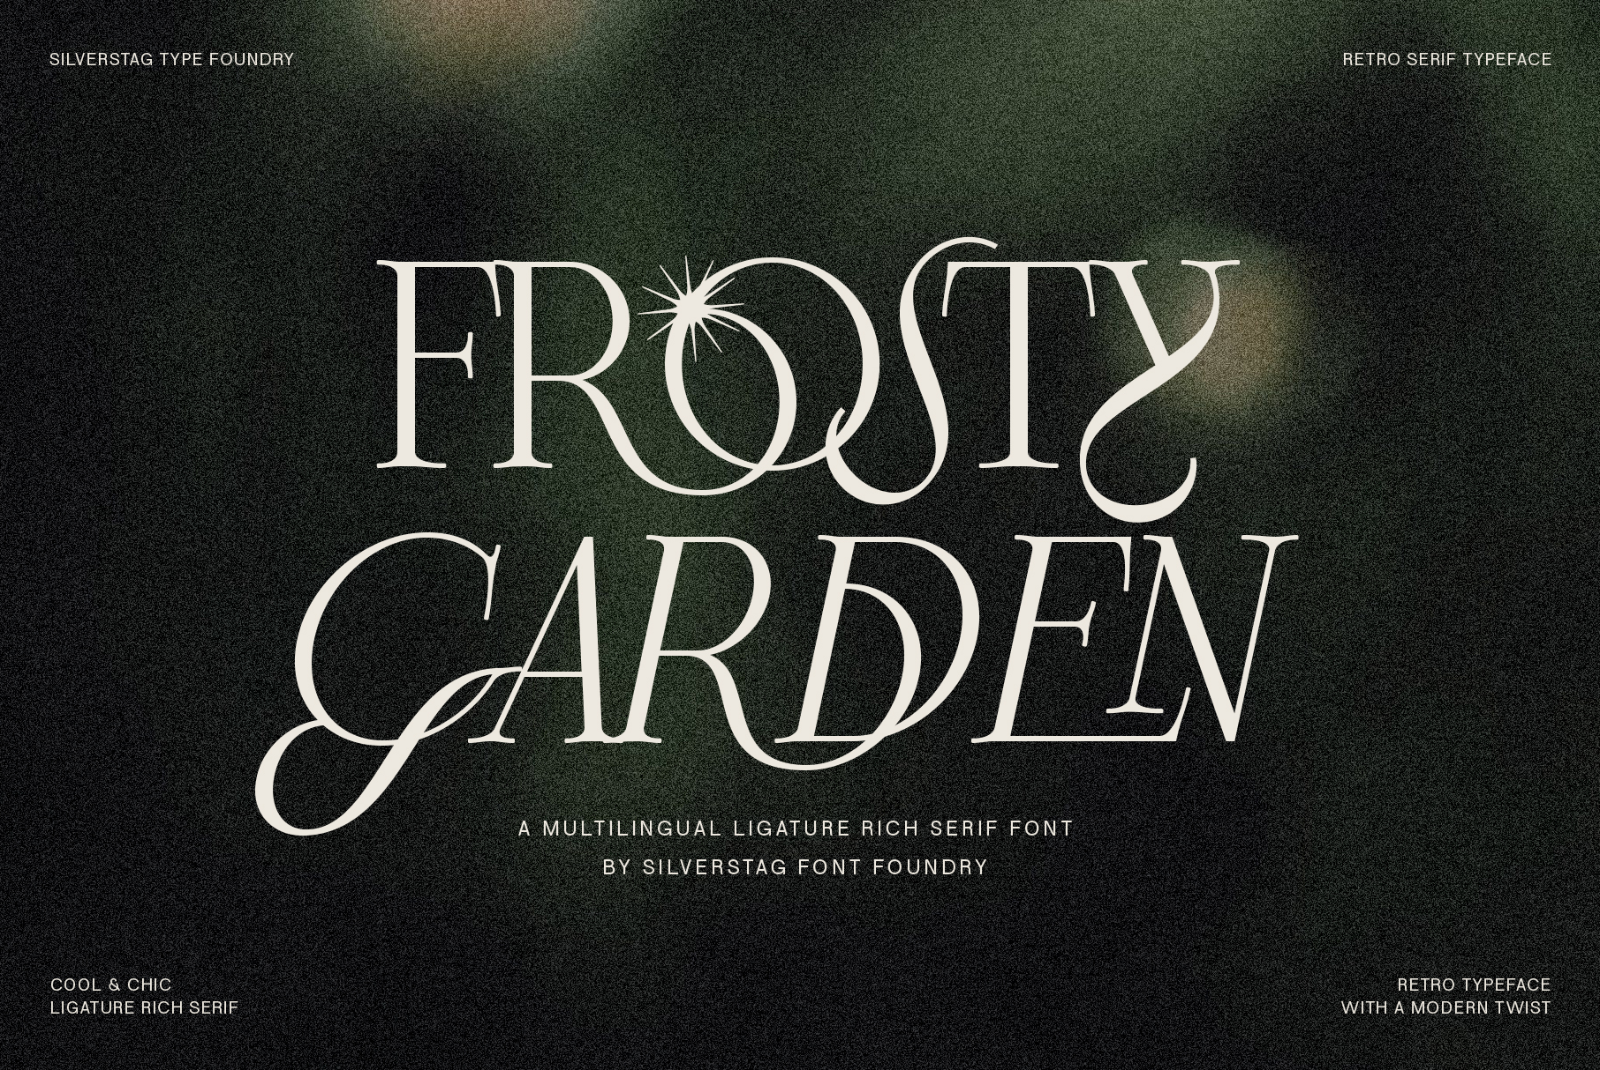 Retro serif typeface Frosty Garden preview by Silverstag, showcasing a multilingual ligature-rich serif font for designers.